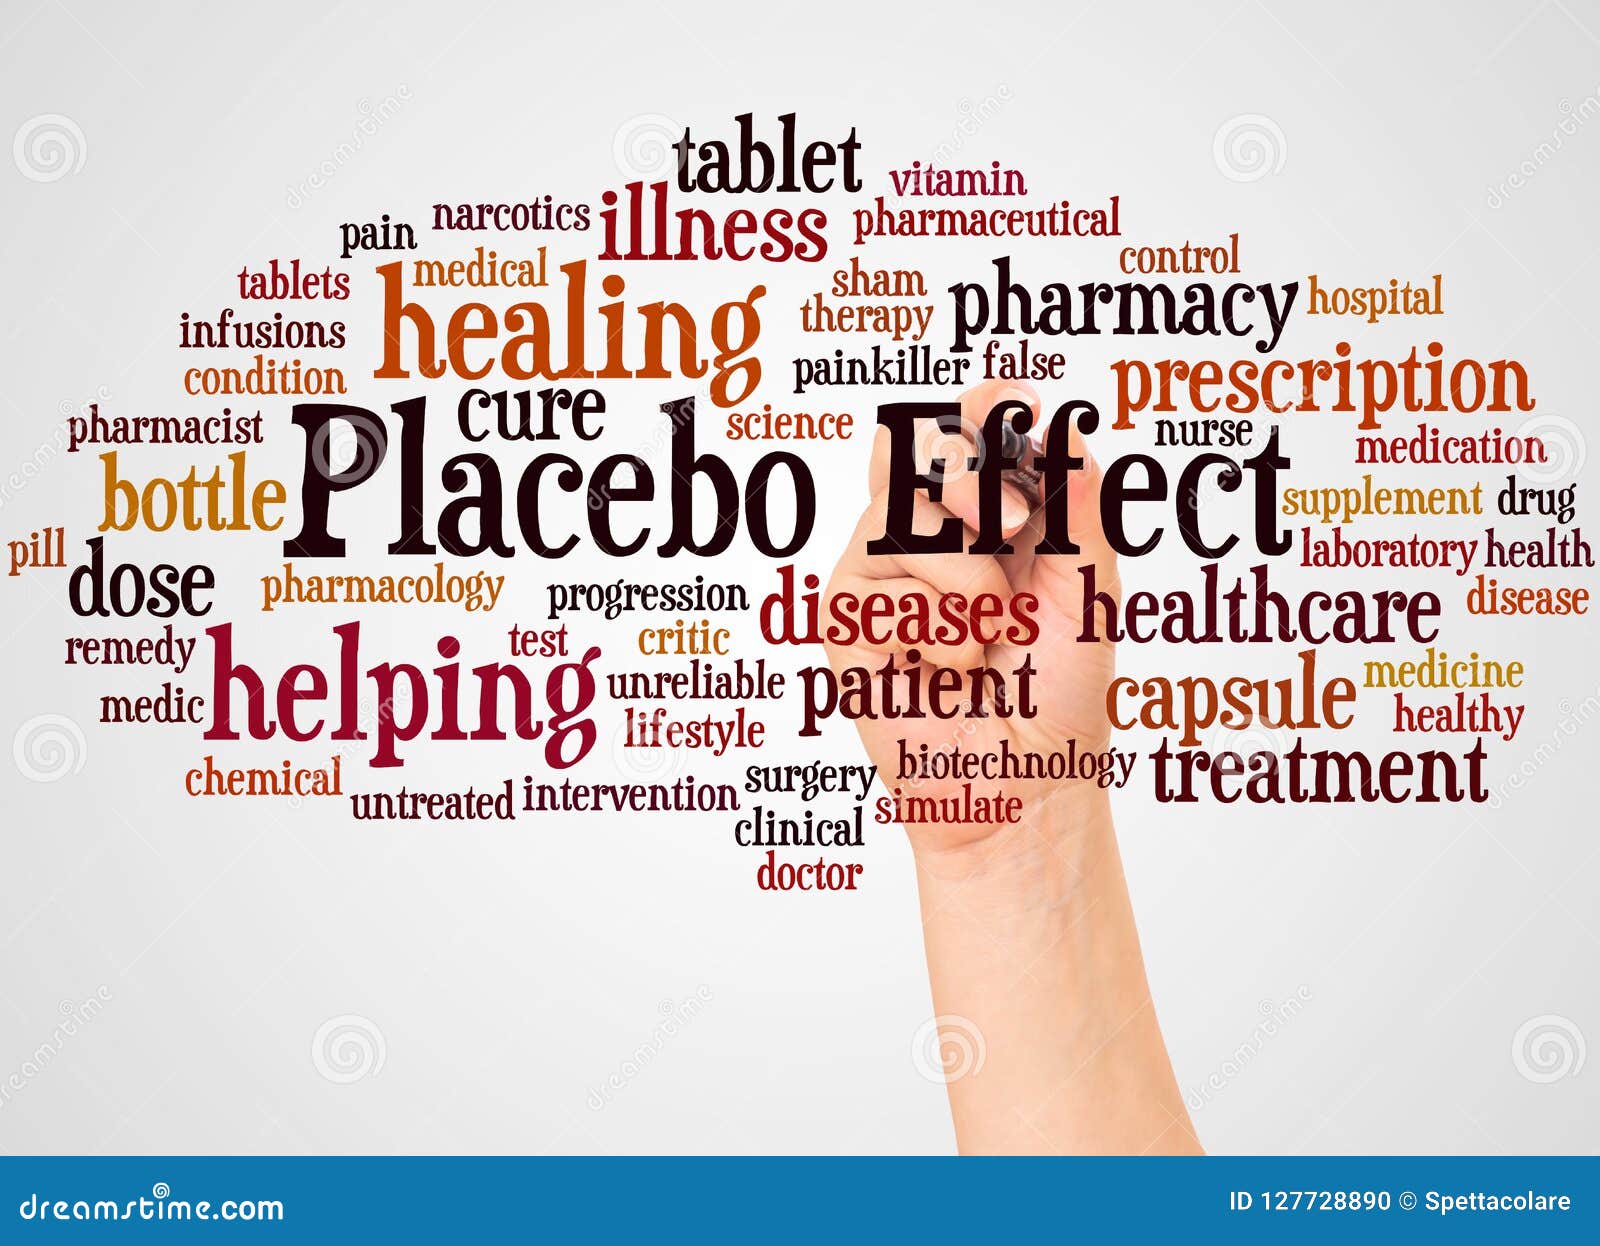 placebo effect word cloud and hand with marker concept